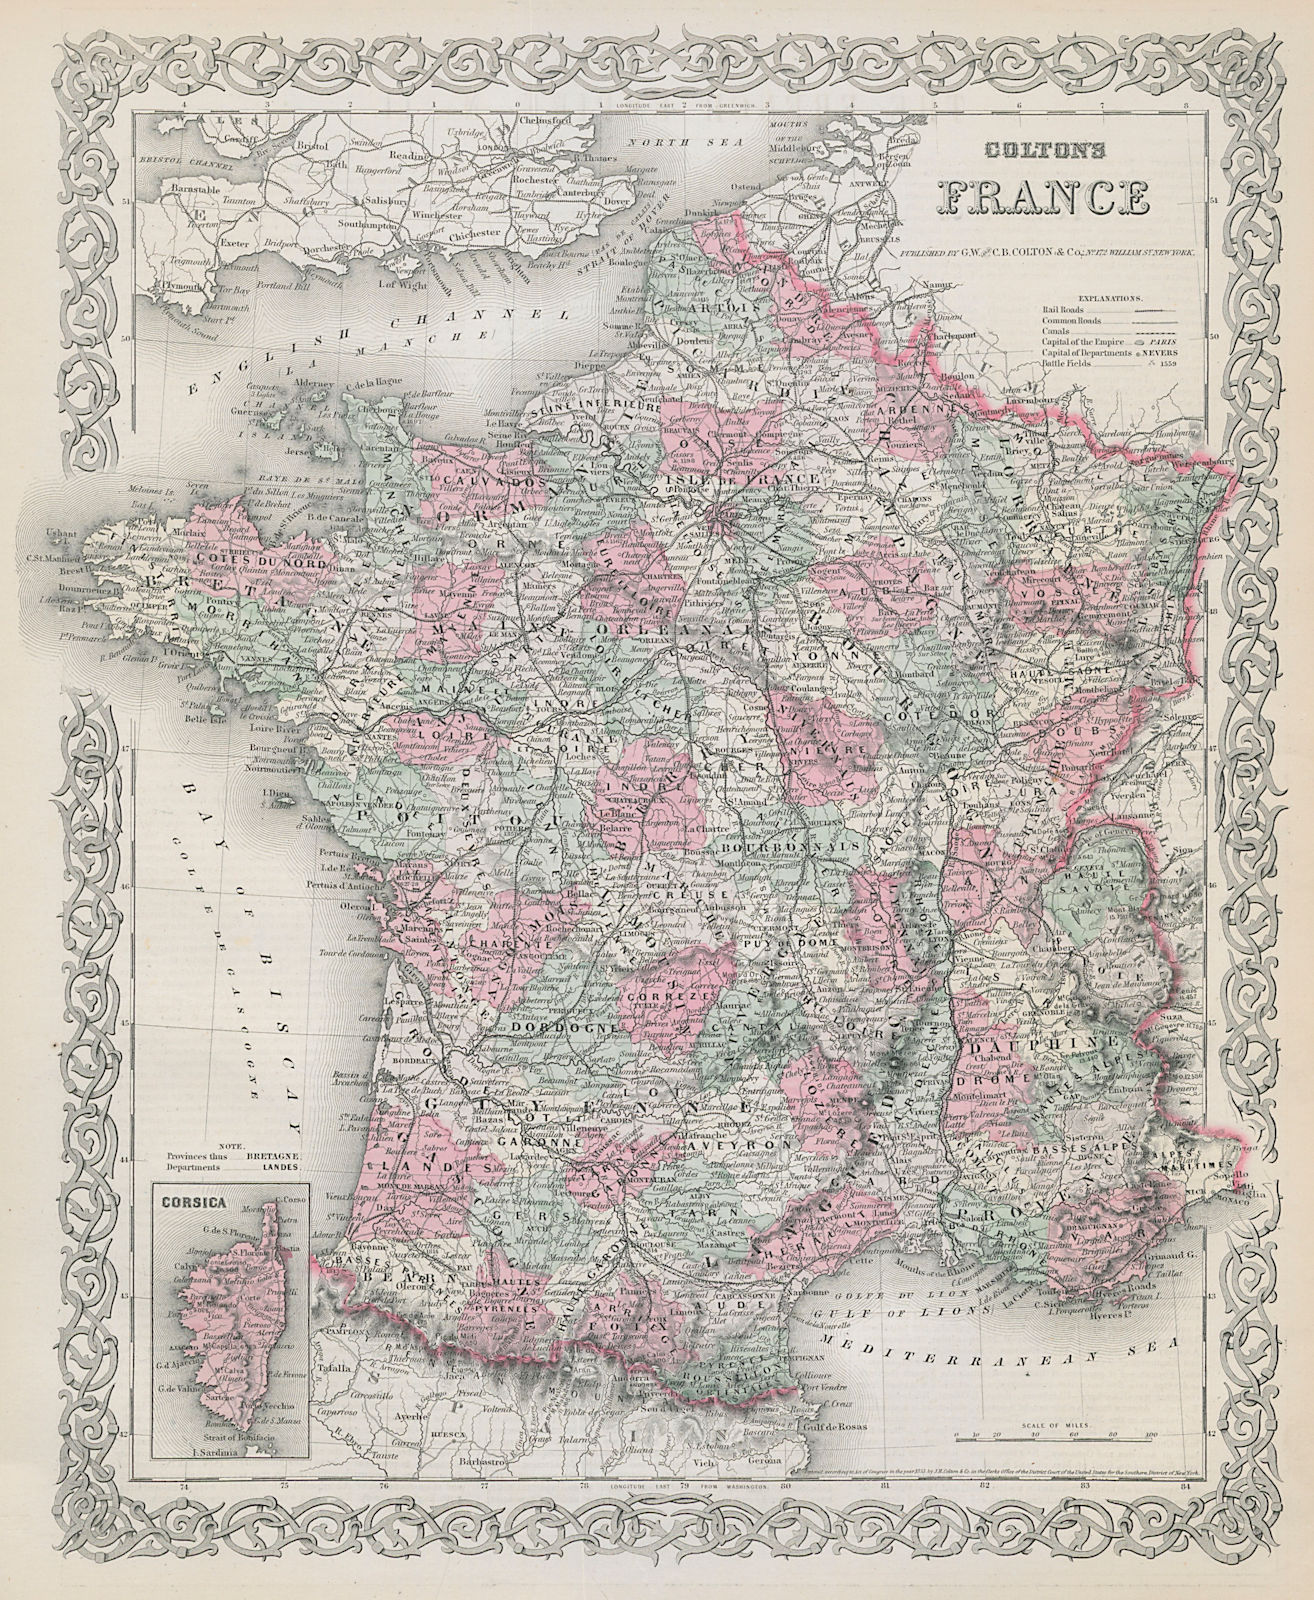 Colton's France in departments and provinces. Decorative antique map 1869